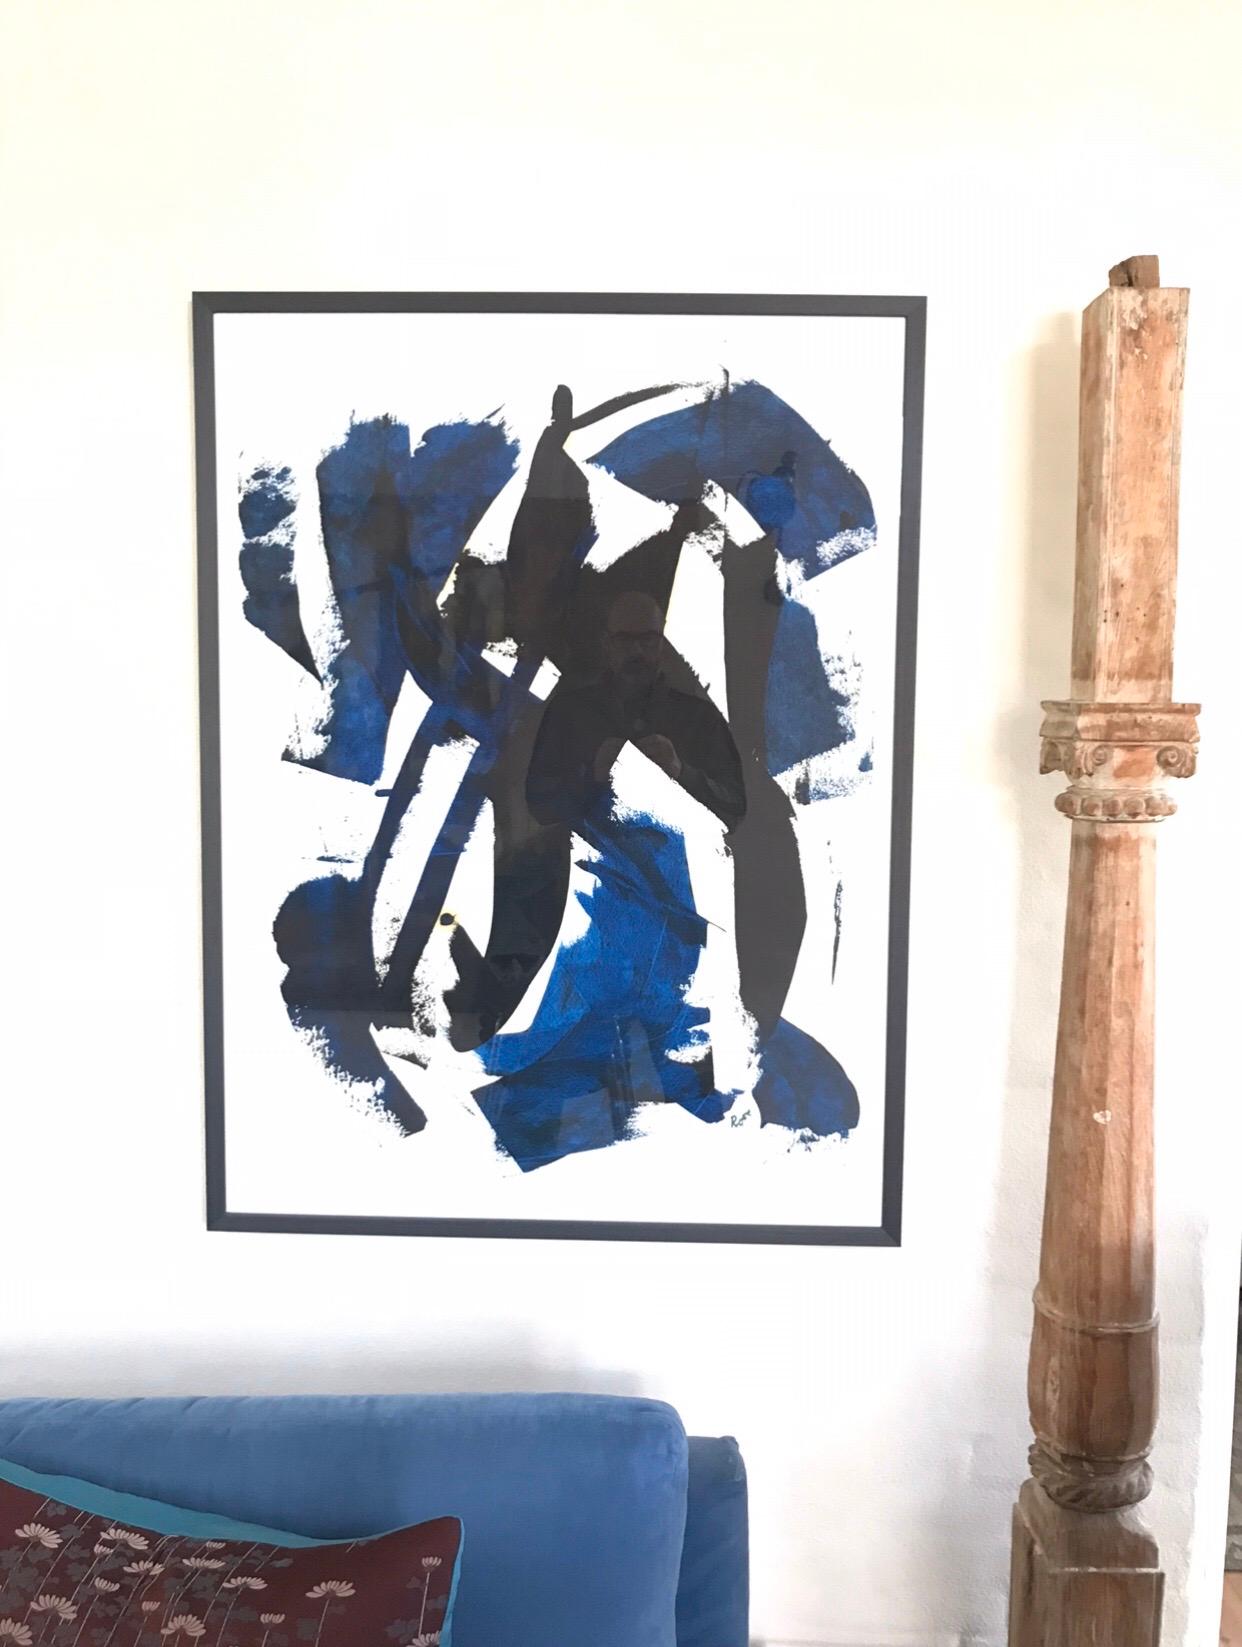 Oil on paper
Black gives way for blue
By Jan Rose
Jan Rose has led an interesting life from The French Foreign Legion, body guard for the stars, author and now artist.
Jan Rose is exceptionally good at establishing form, color, line, texture,